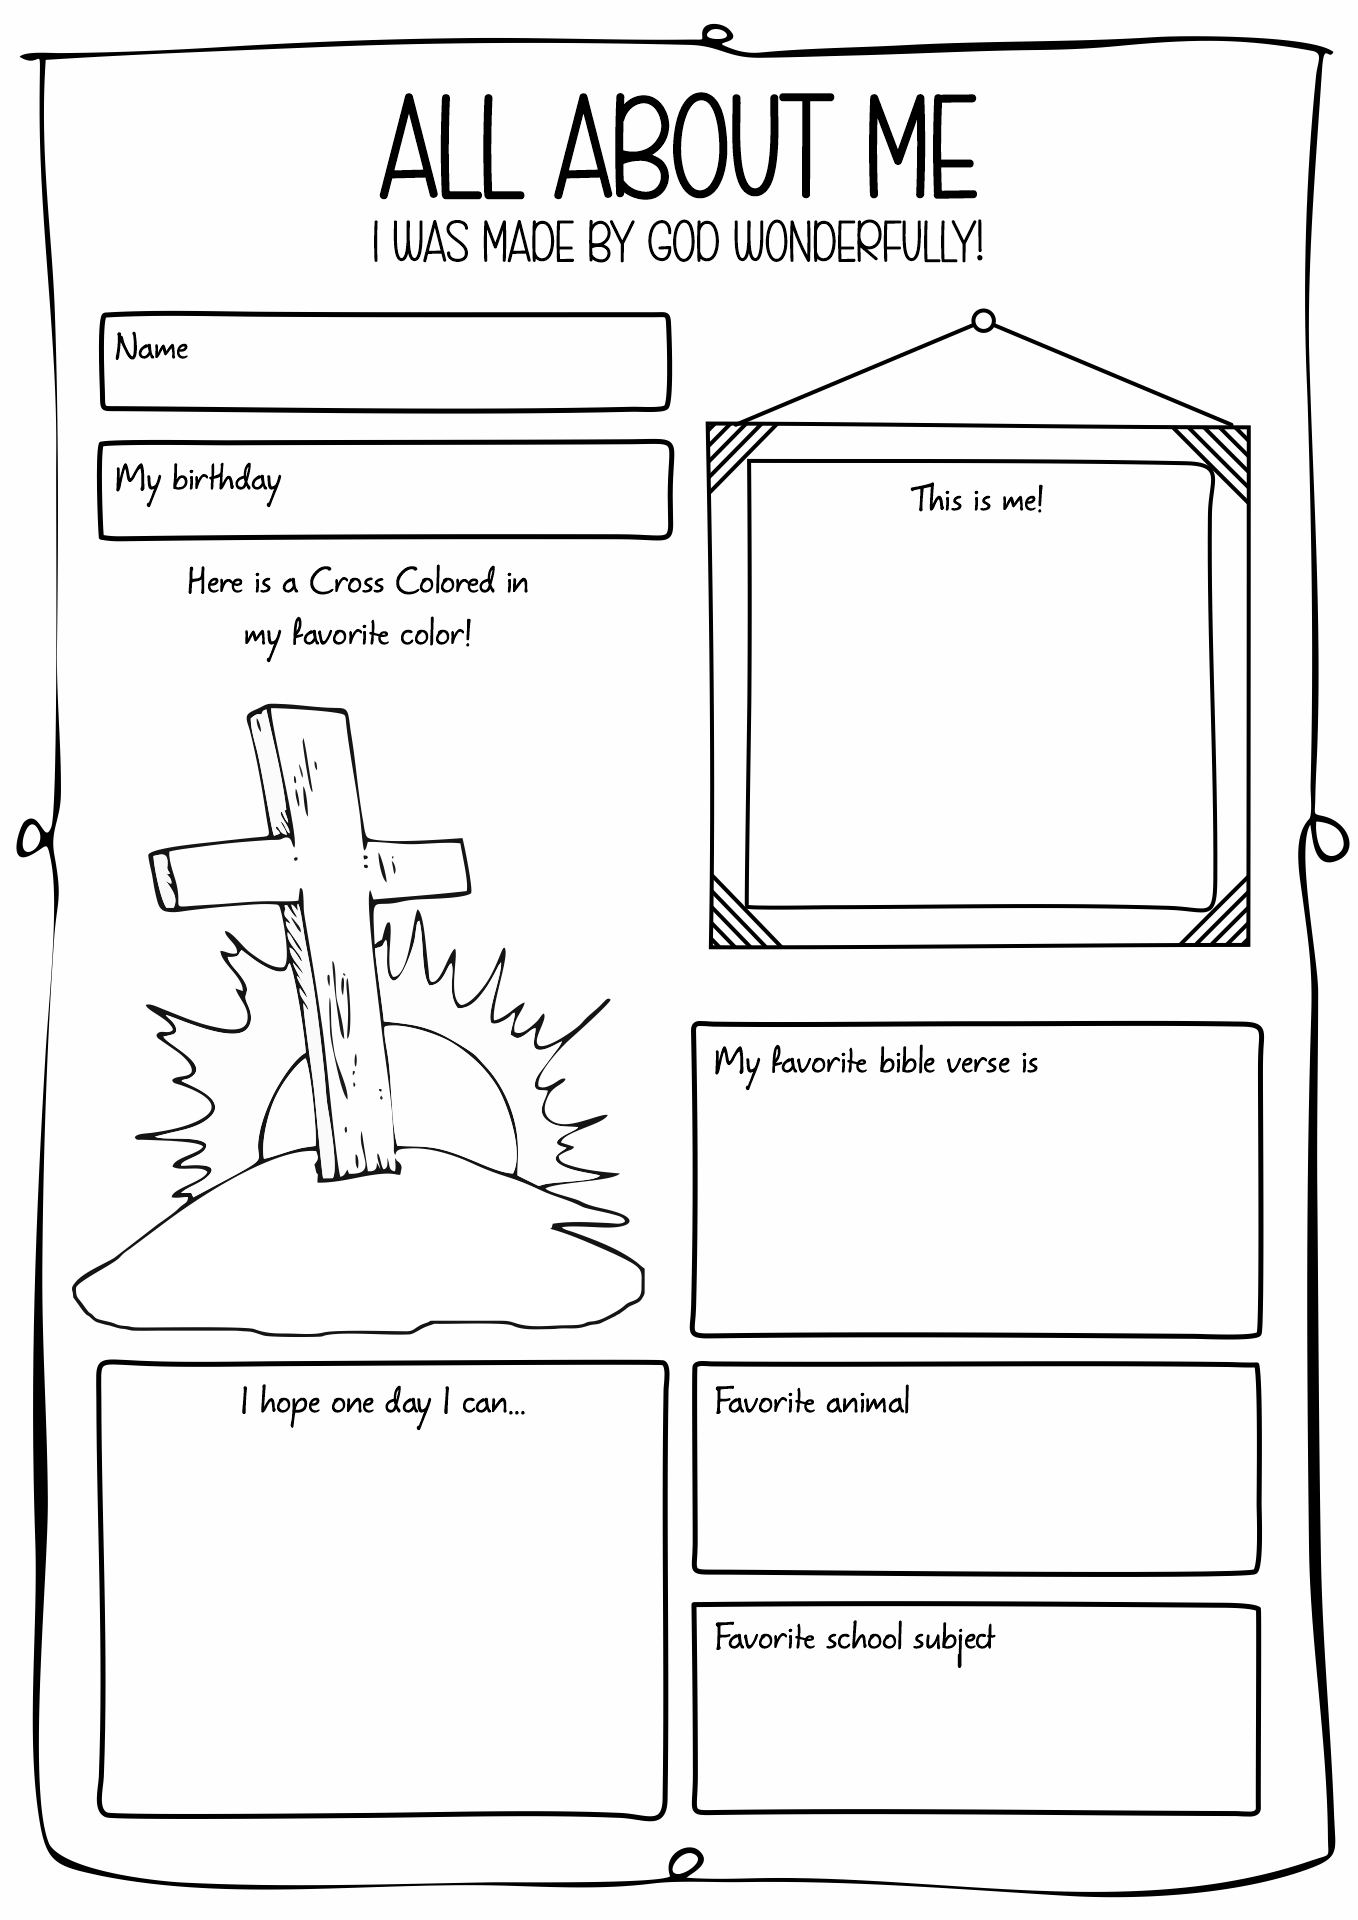 All About Me Printable Catholic Worksheets Image